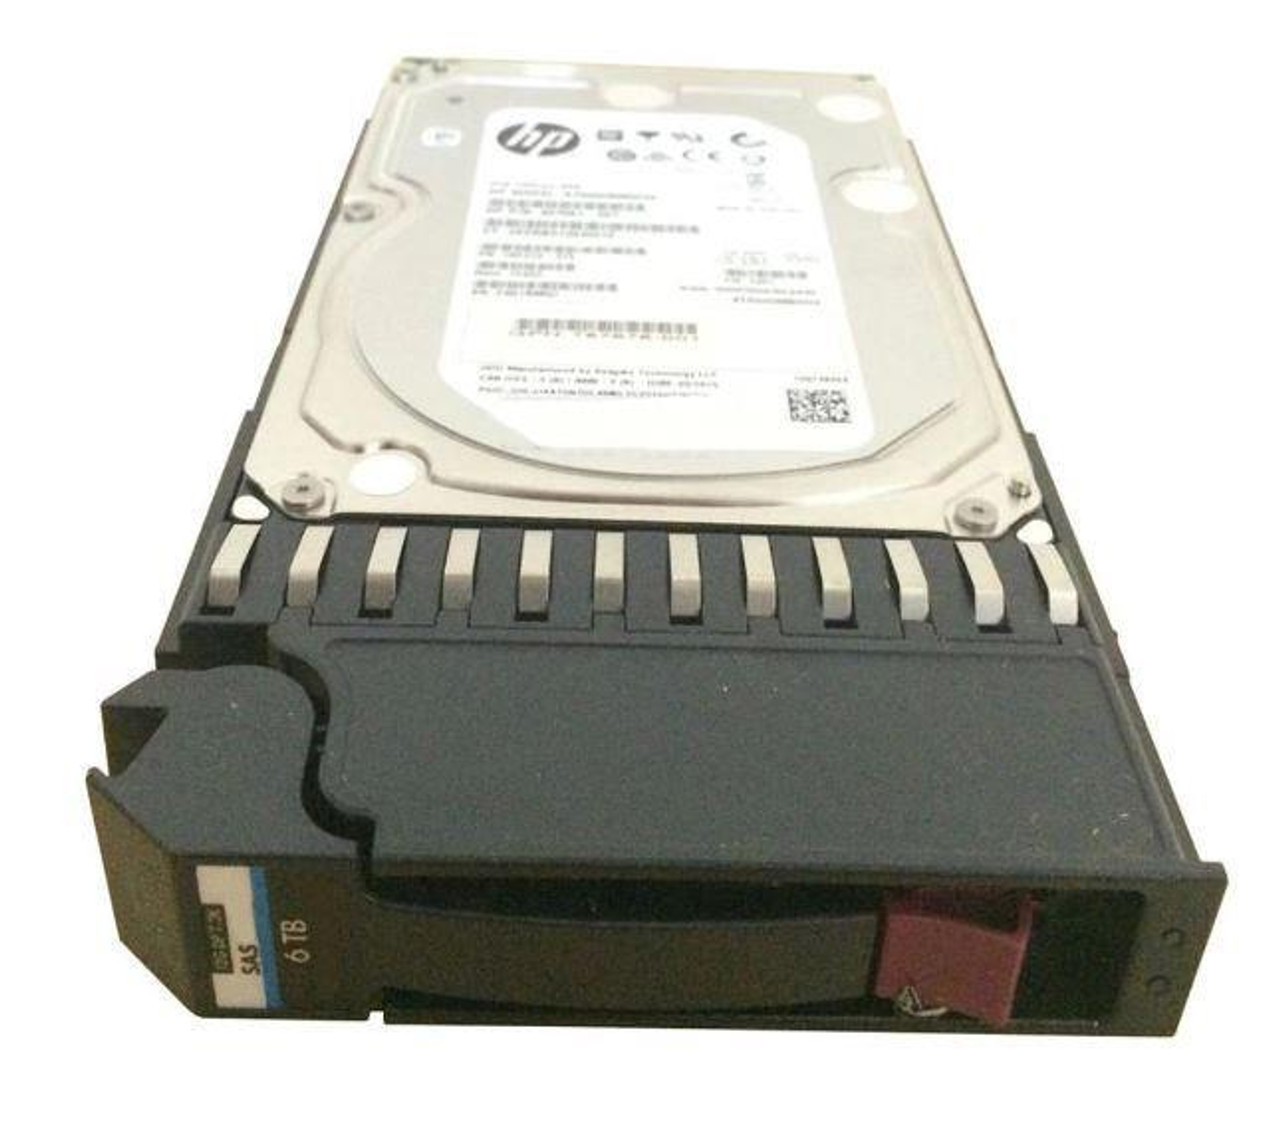 861754-K21 HPE 6TB 7200RPM SAS 12Gbps (512e) 3.5-inch Internal Hard Drive with Smart Carrier